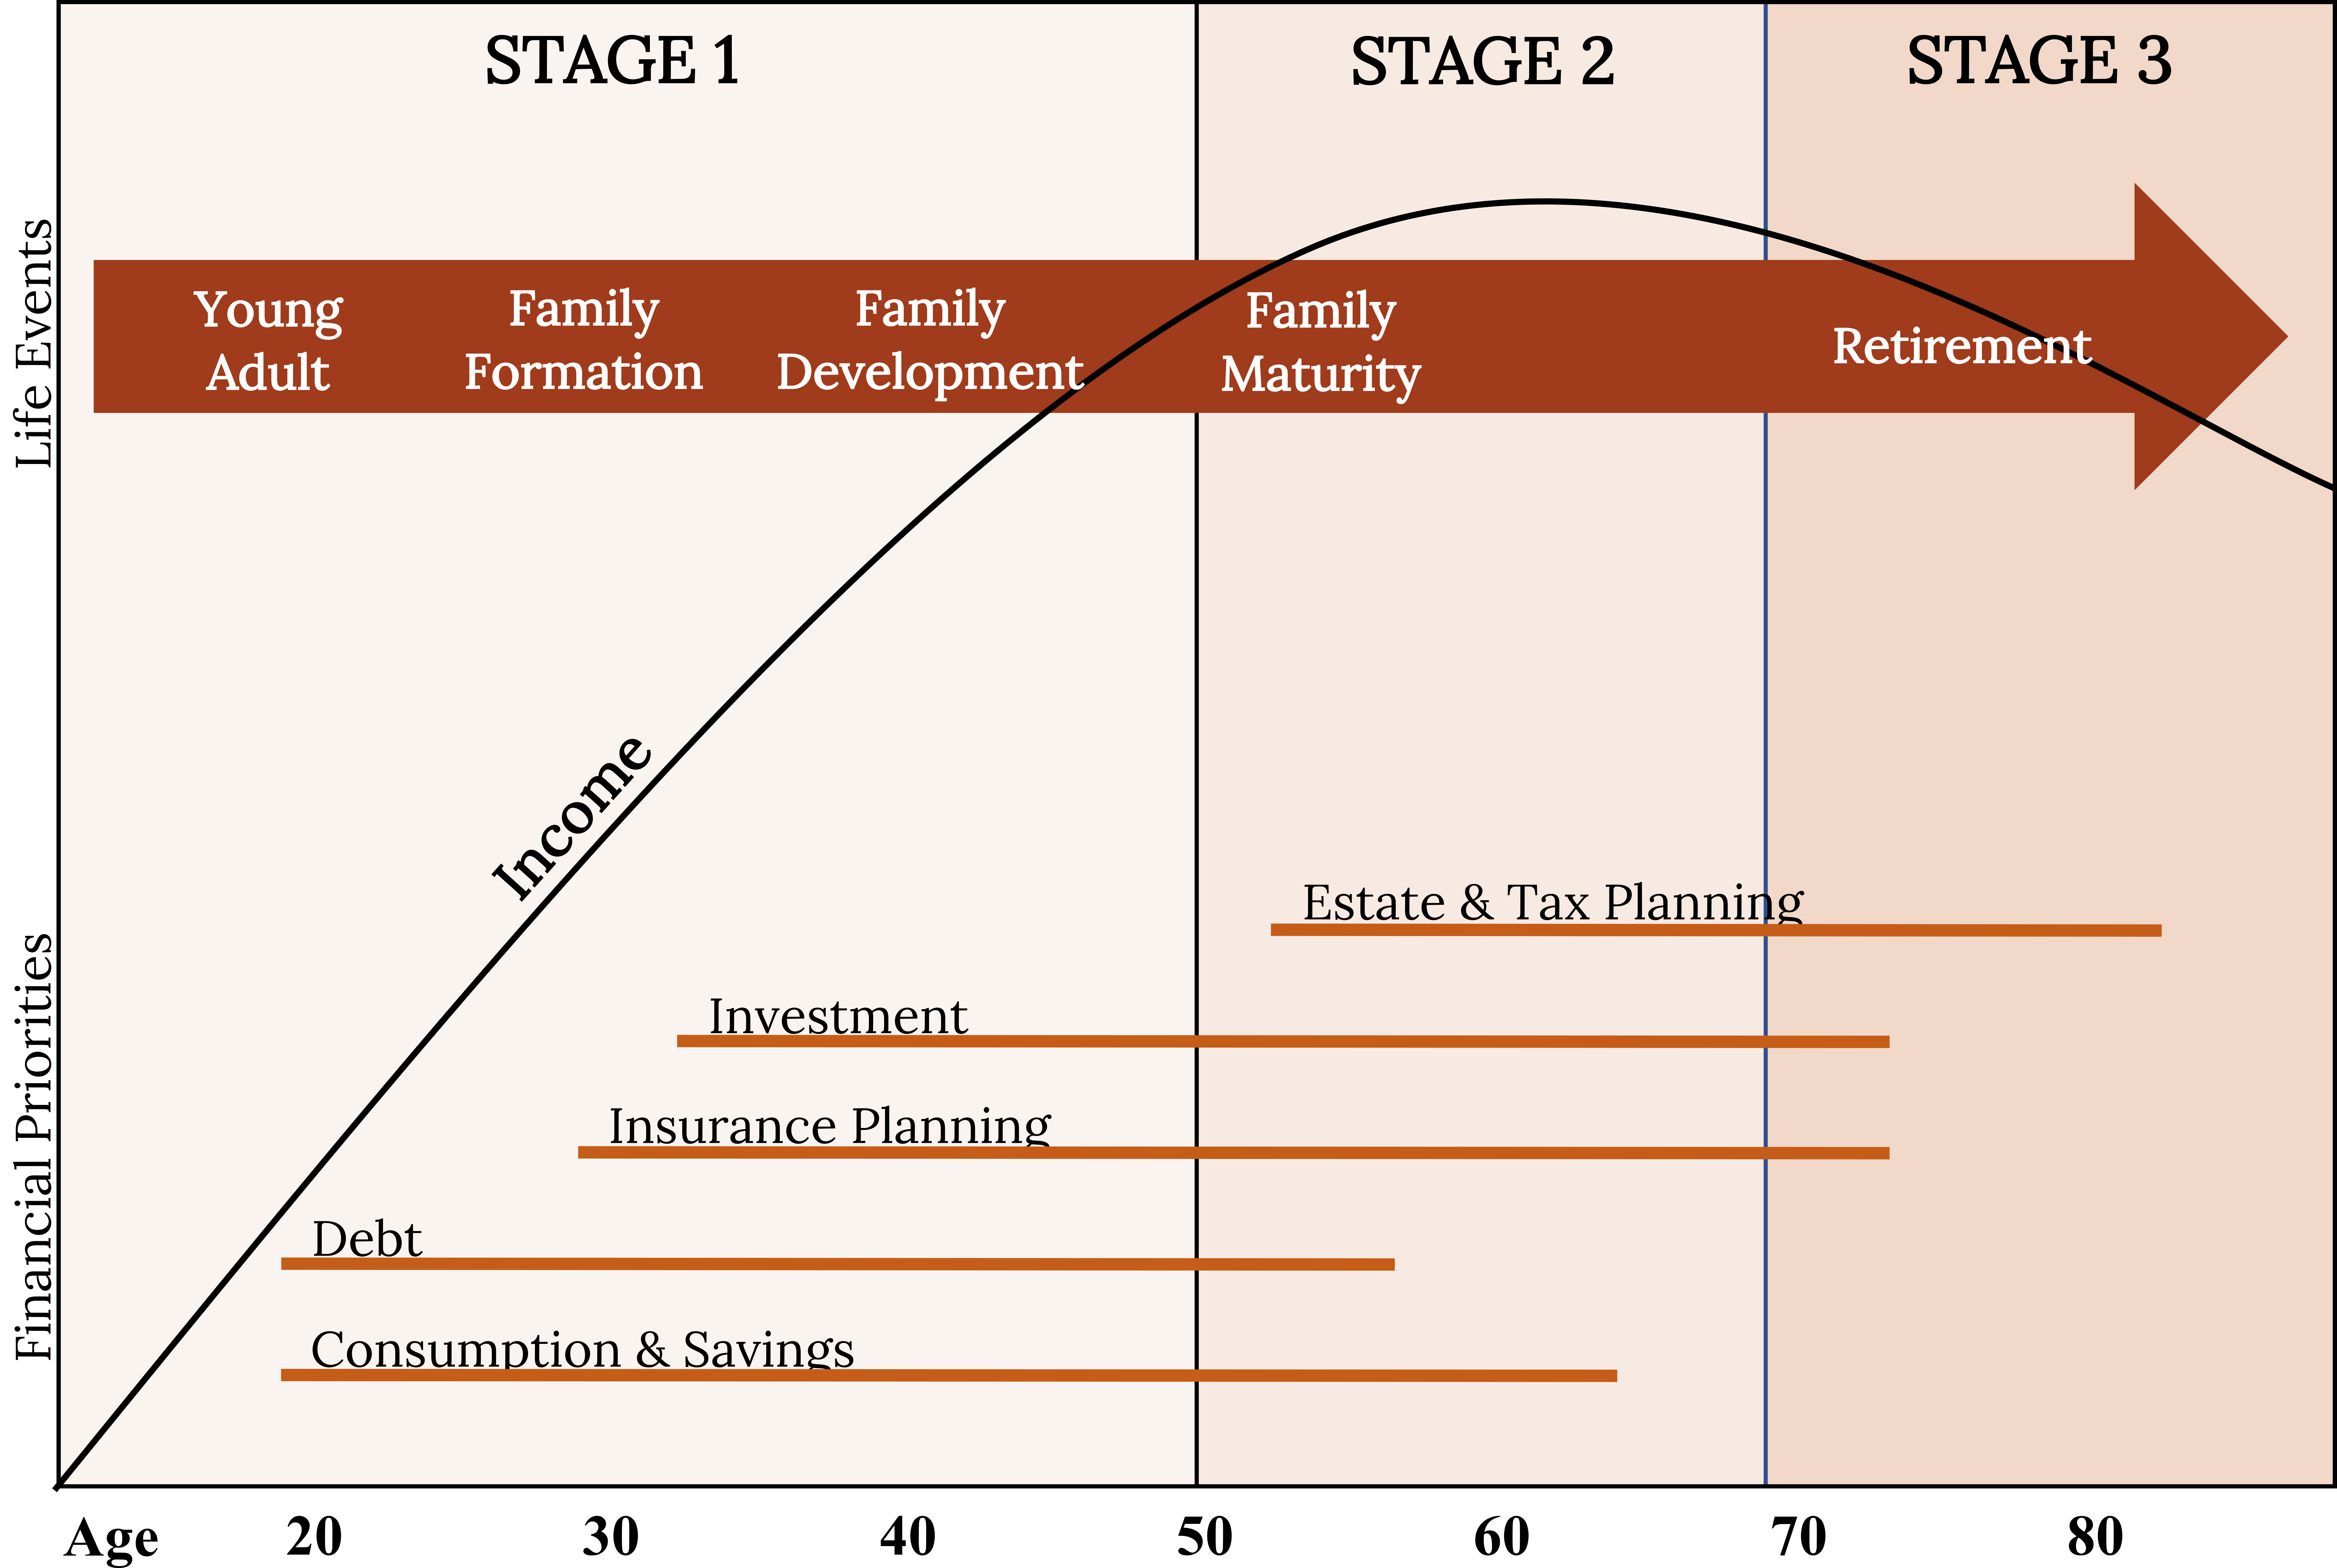 A graphical representation of the financial life cycle. The x-axis shows age from 20 to 80 in ten year increments. The graph is split into three stages. Stage 1 extends from 20 to 50. Stage 2 extends from 50 to 70. Stage 3 extends from 70 to 80. A large right sided arrow lies in the top of the graph, labeled “Life Events.” Five events lie on the life events arrow representing events at different ages. Age and events from left to right: Age 20, Young Adult; Age 25, Family Formation; Age 35, Family Development; Age 50, Family Maturity; Age 75, Retirement. A curved line representing income begins at the origin of the graph, steadily increases and peaks around 60 years old, then steadily decreases at the same rate. Five straight orange lines representing “Financial Priorities” lie under the income line vertically, beginning and ending at different ages. Age ranges and priorities listed from bottom to top are: Age 20 to 70, Consumption and savings; Age 20 to 60, Debt; Age 30 to 75, Insurance planning; Age 35 to 75, Investment; Age 50 to 80, Estate and tax planning.